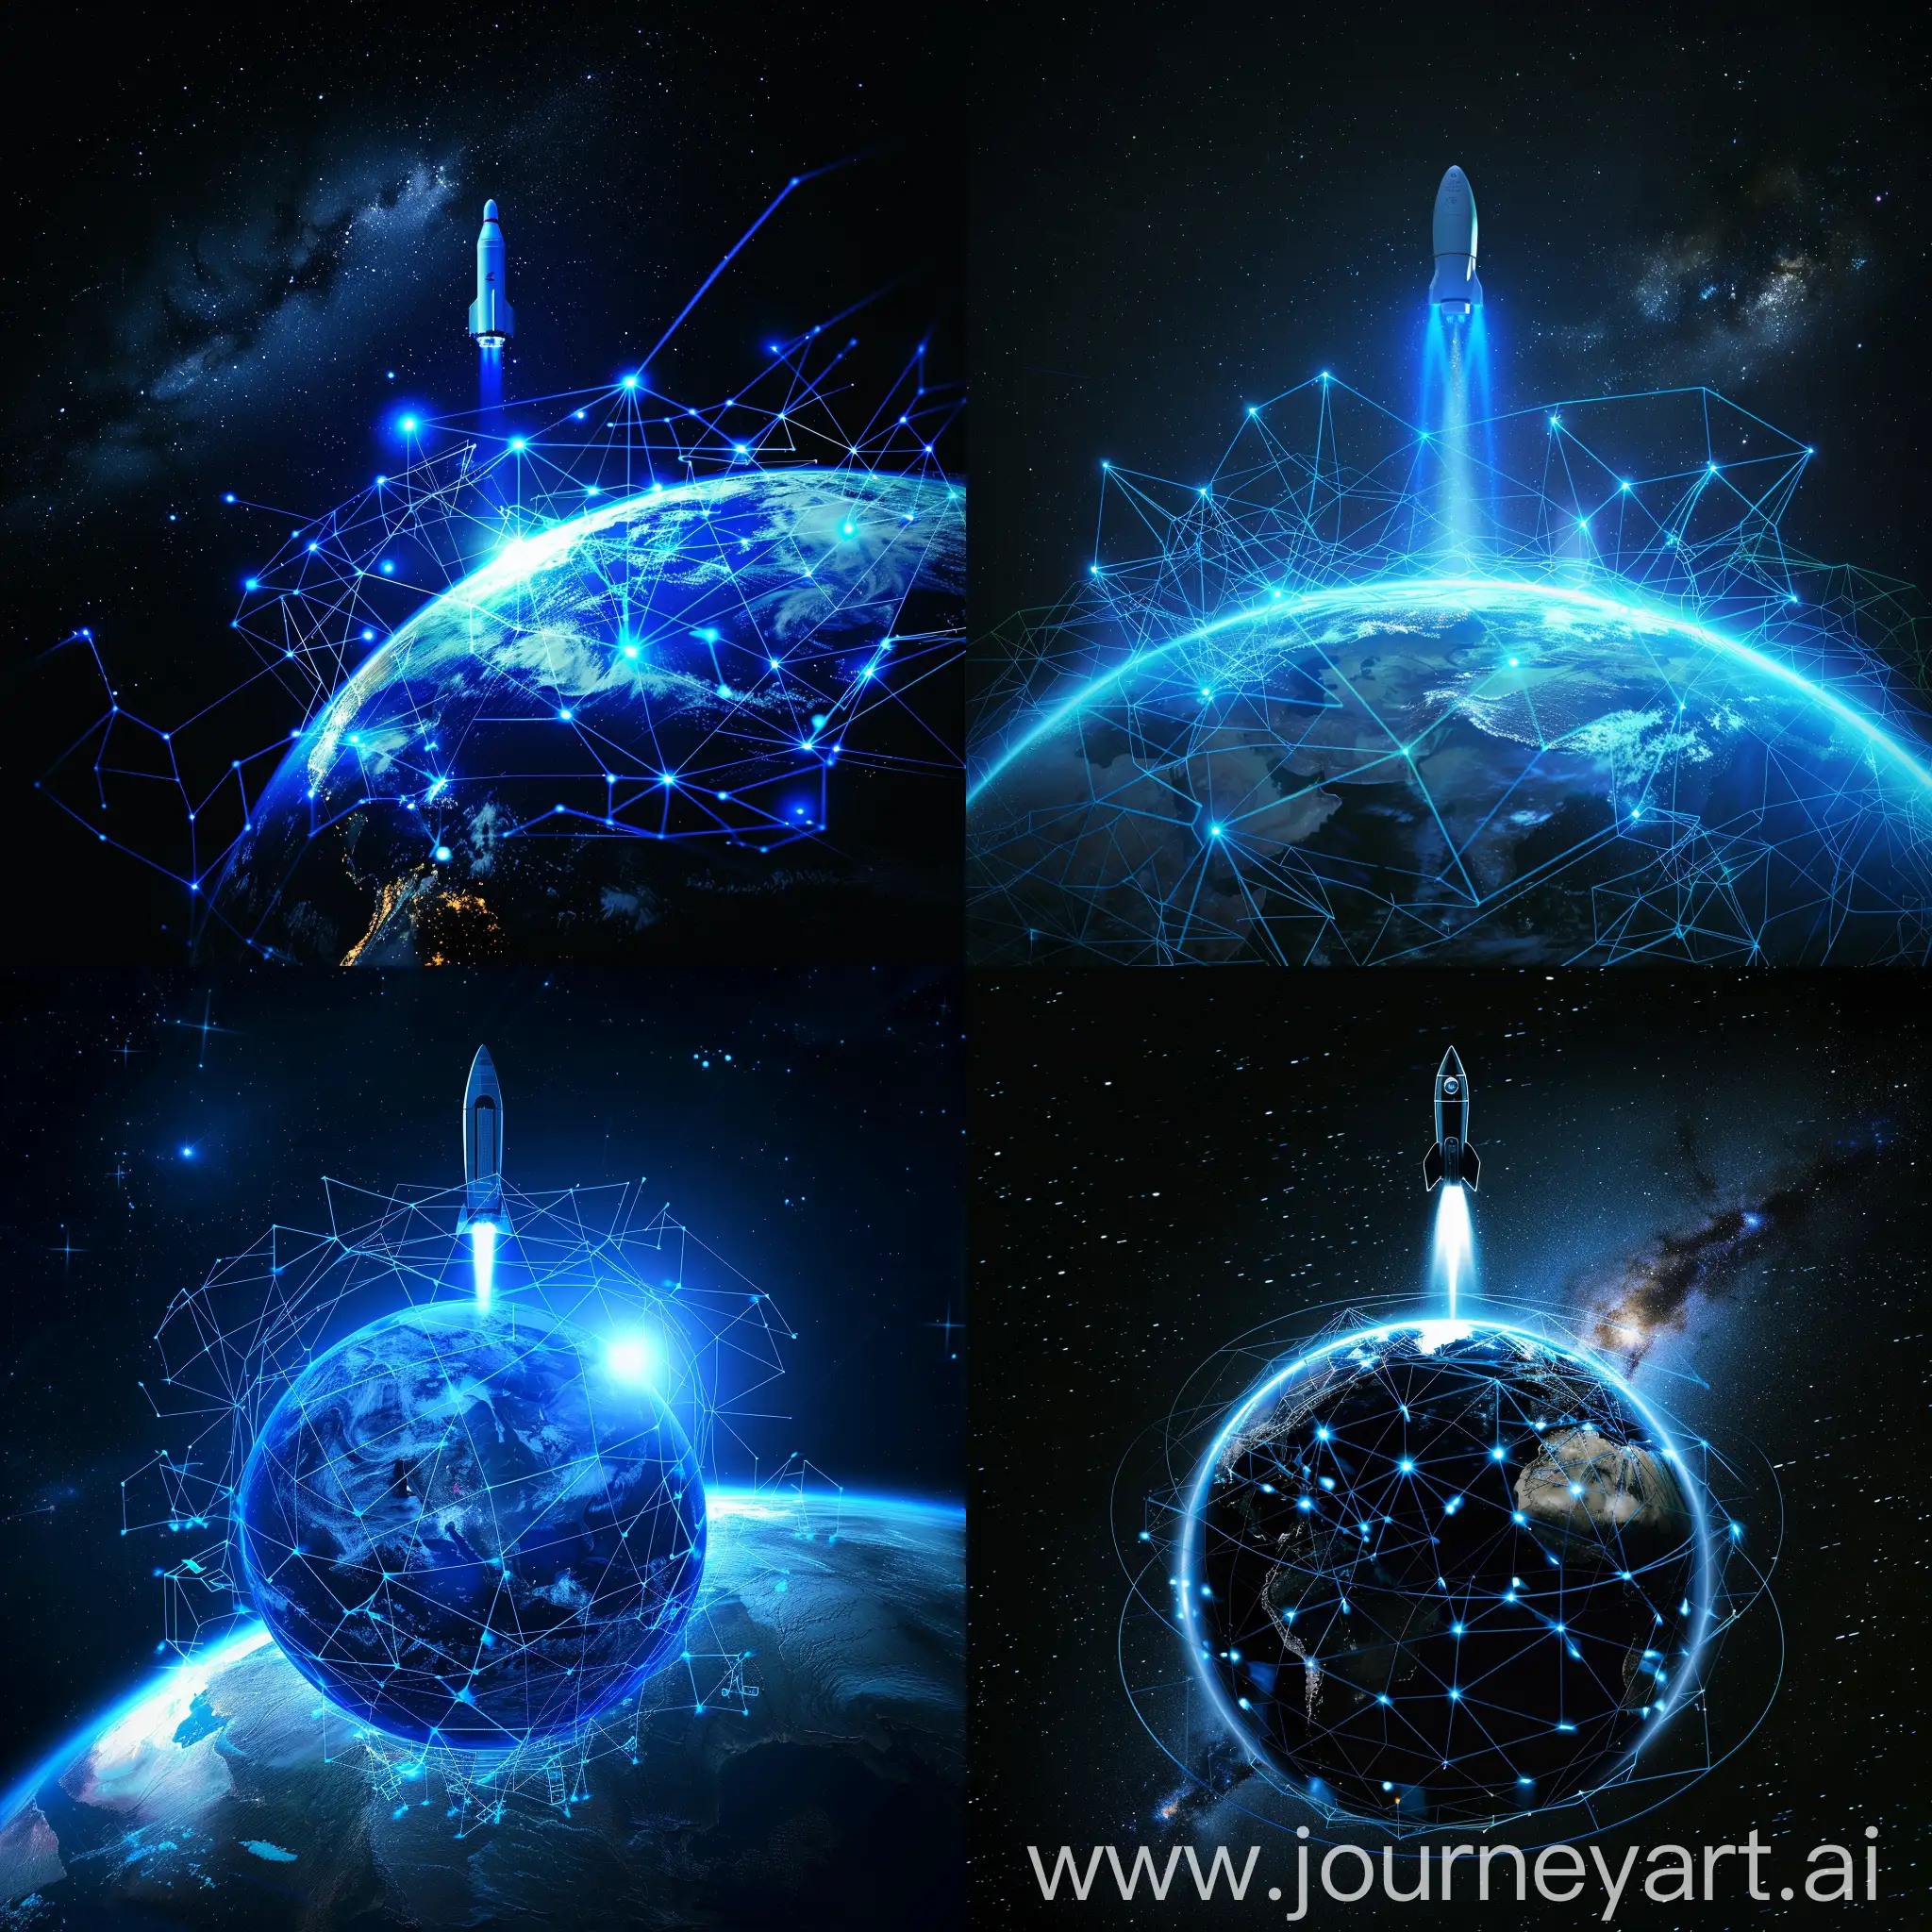 Earth shown with blue colour connecting network of digitization. Rocket in background